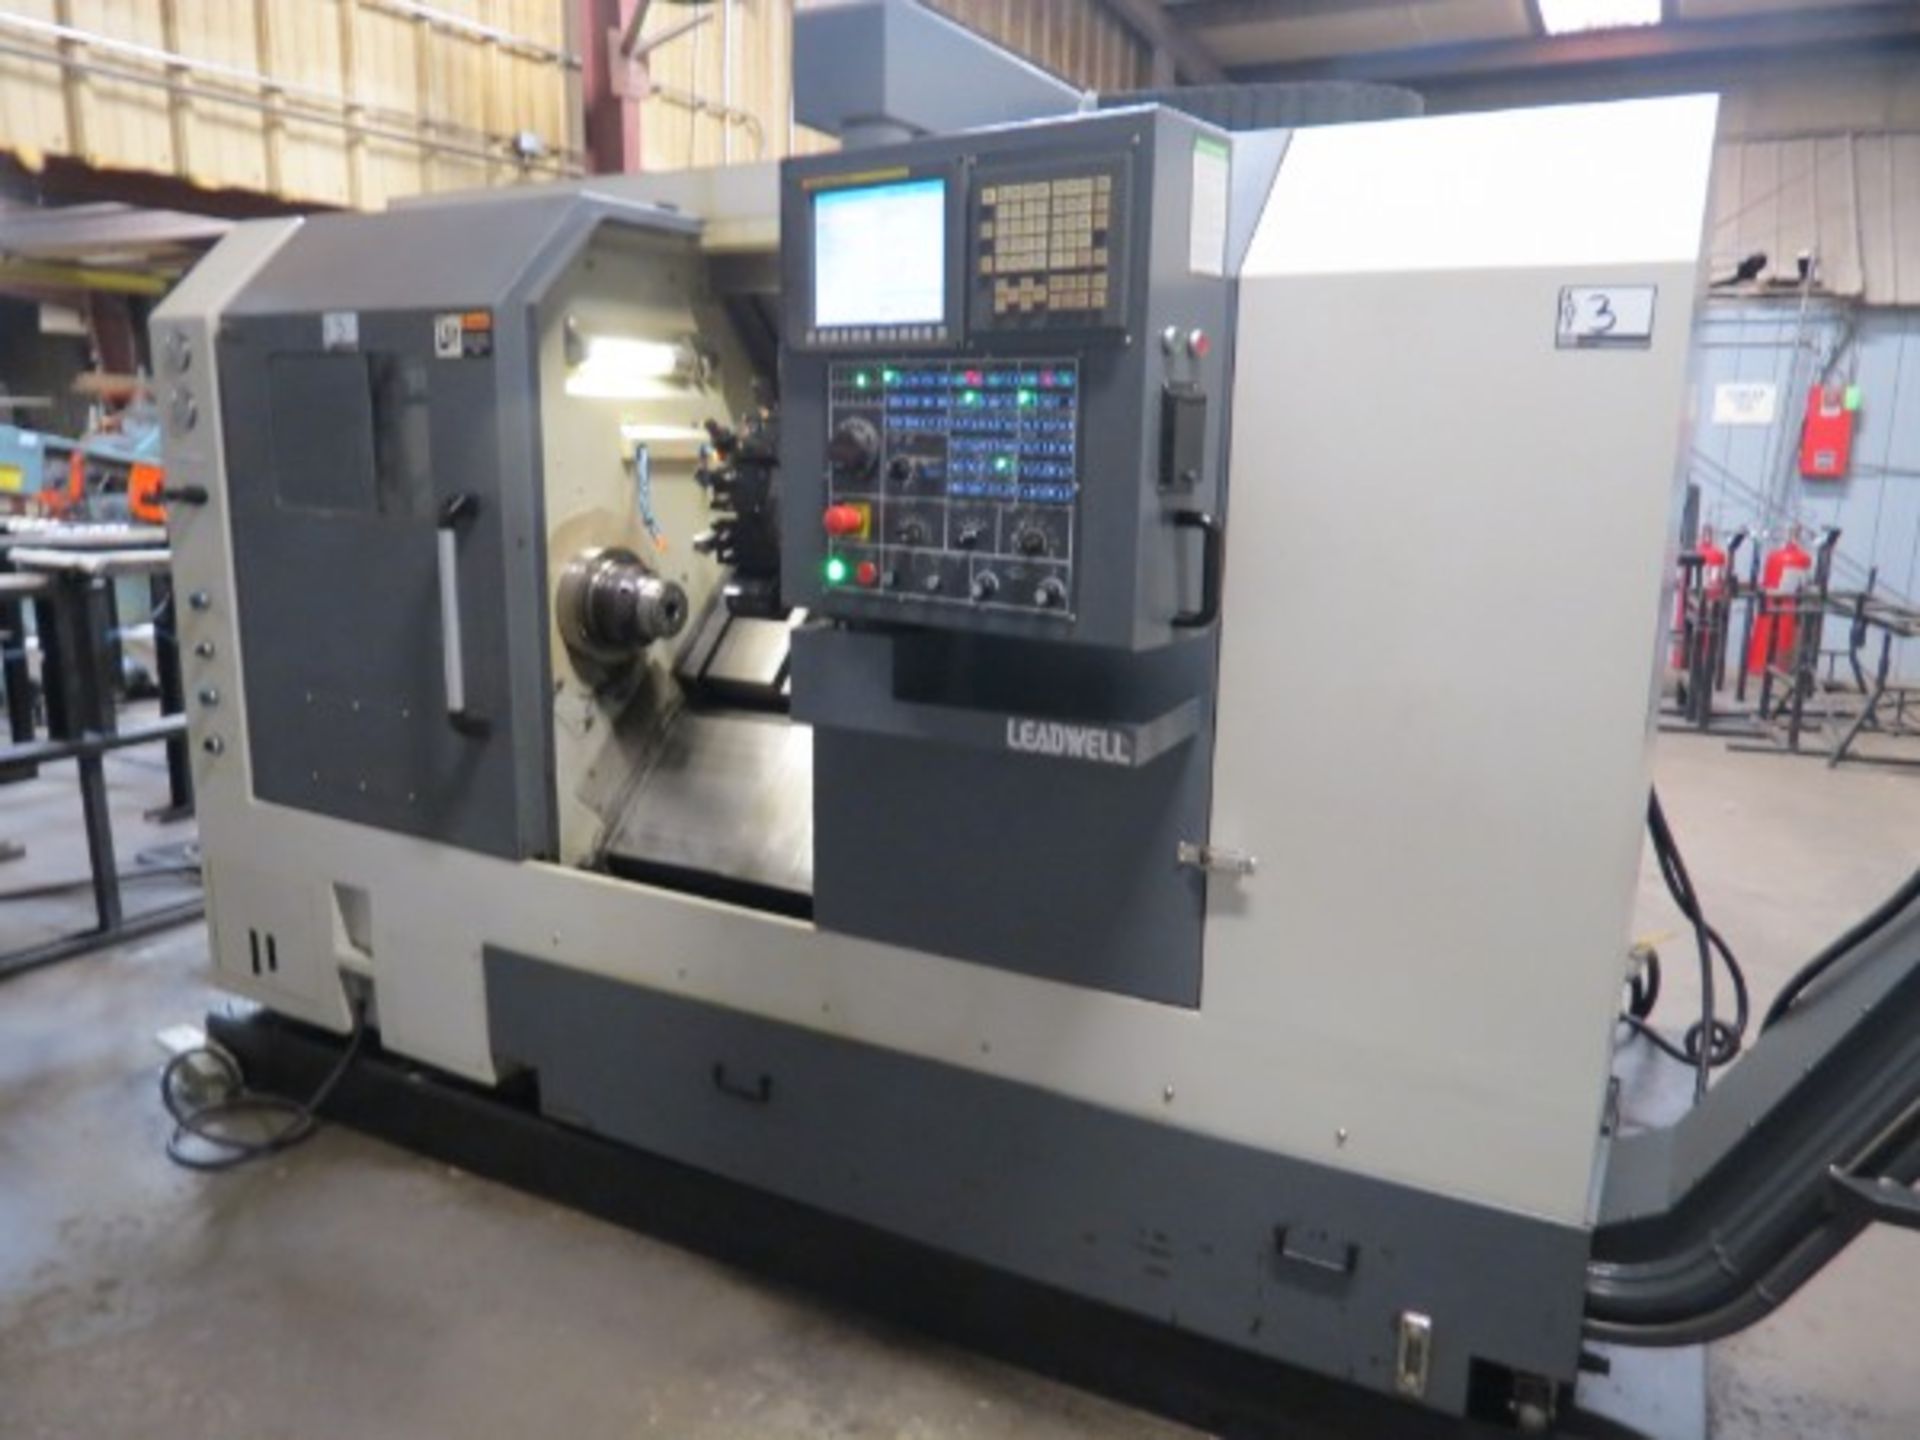 Leadwell T-7 CNC Turning Center Fanuc 0i-TD, 20 HP, 4500 RPM, 8" Chuck, X-Axis 7.9", Y-Axis 23.6", - Image 2 of 7